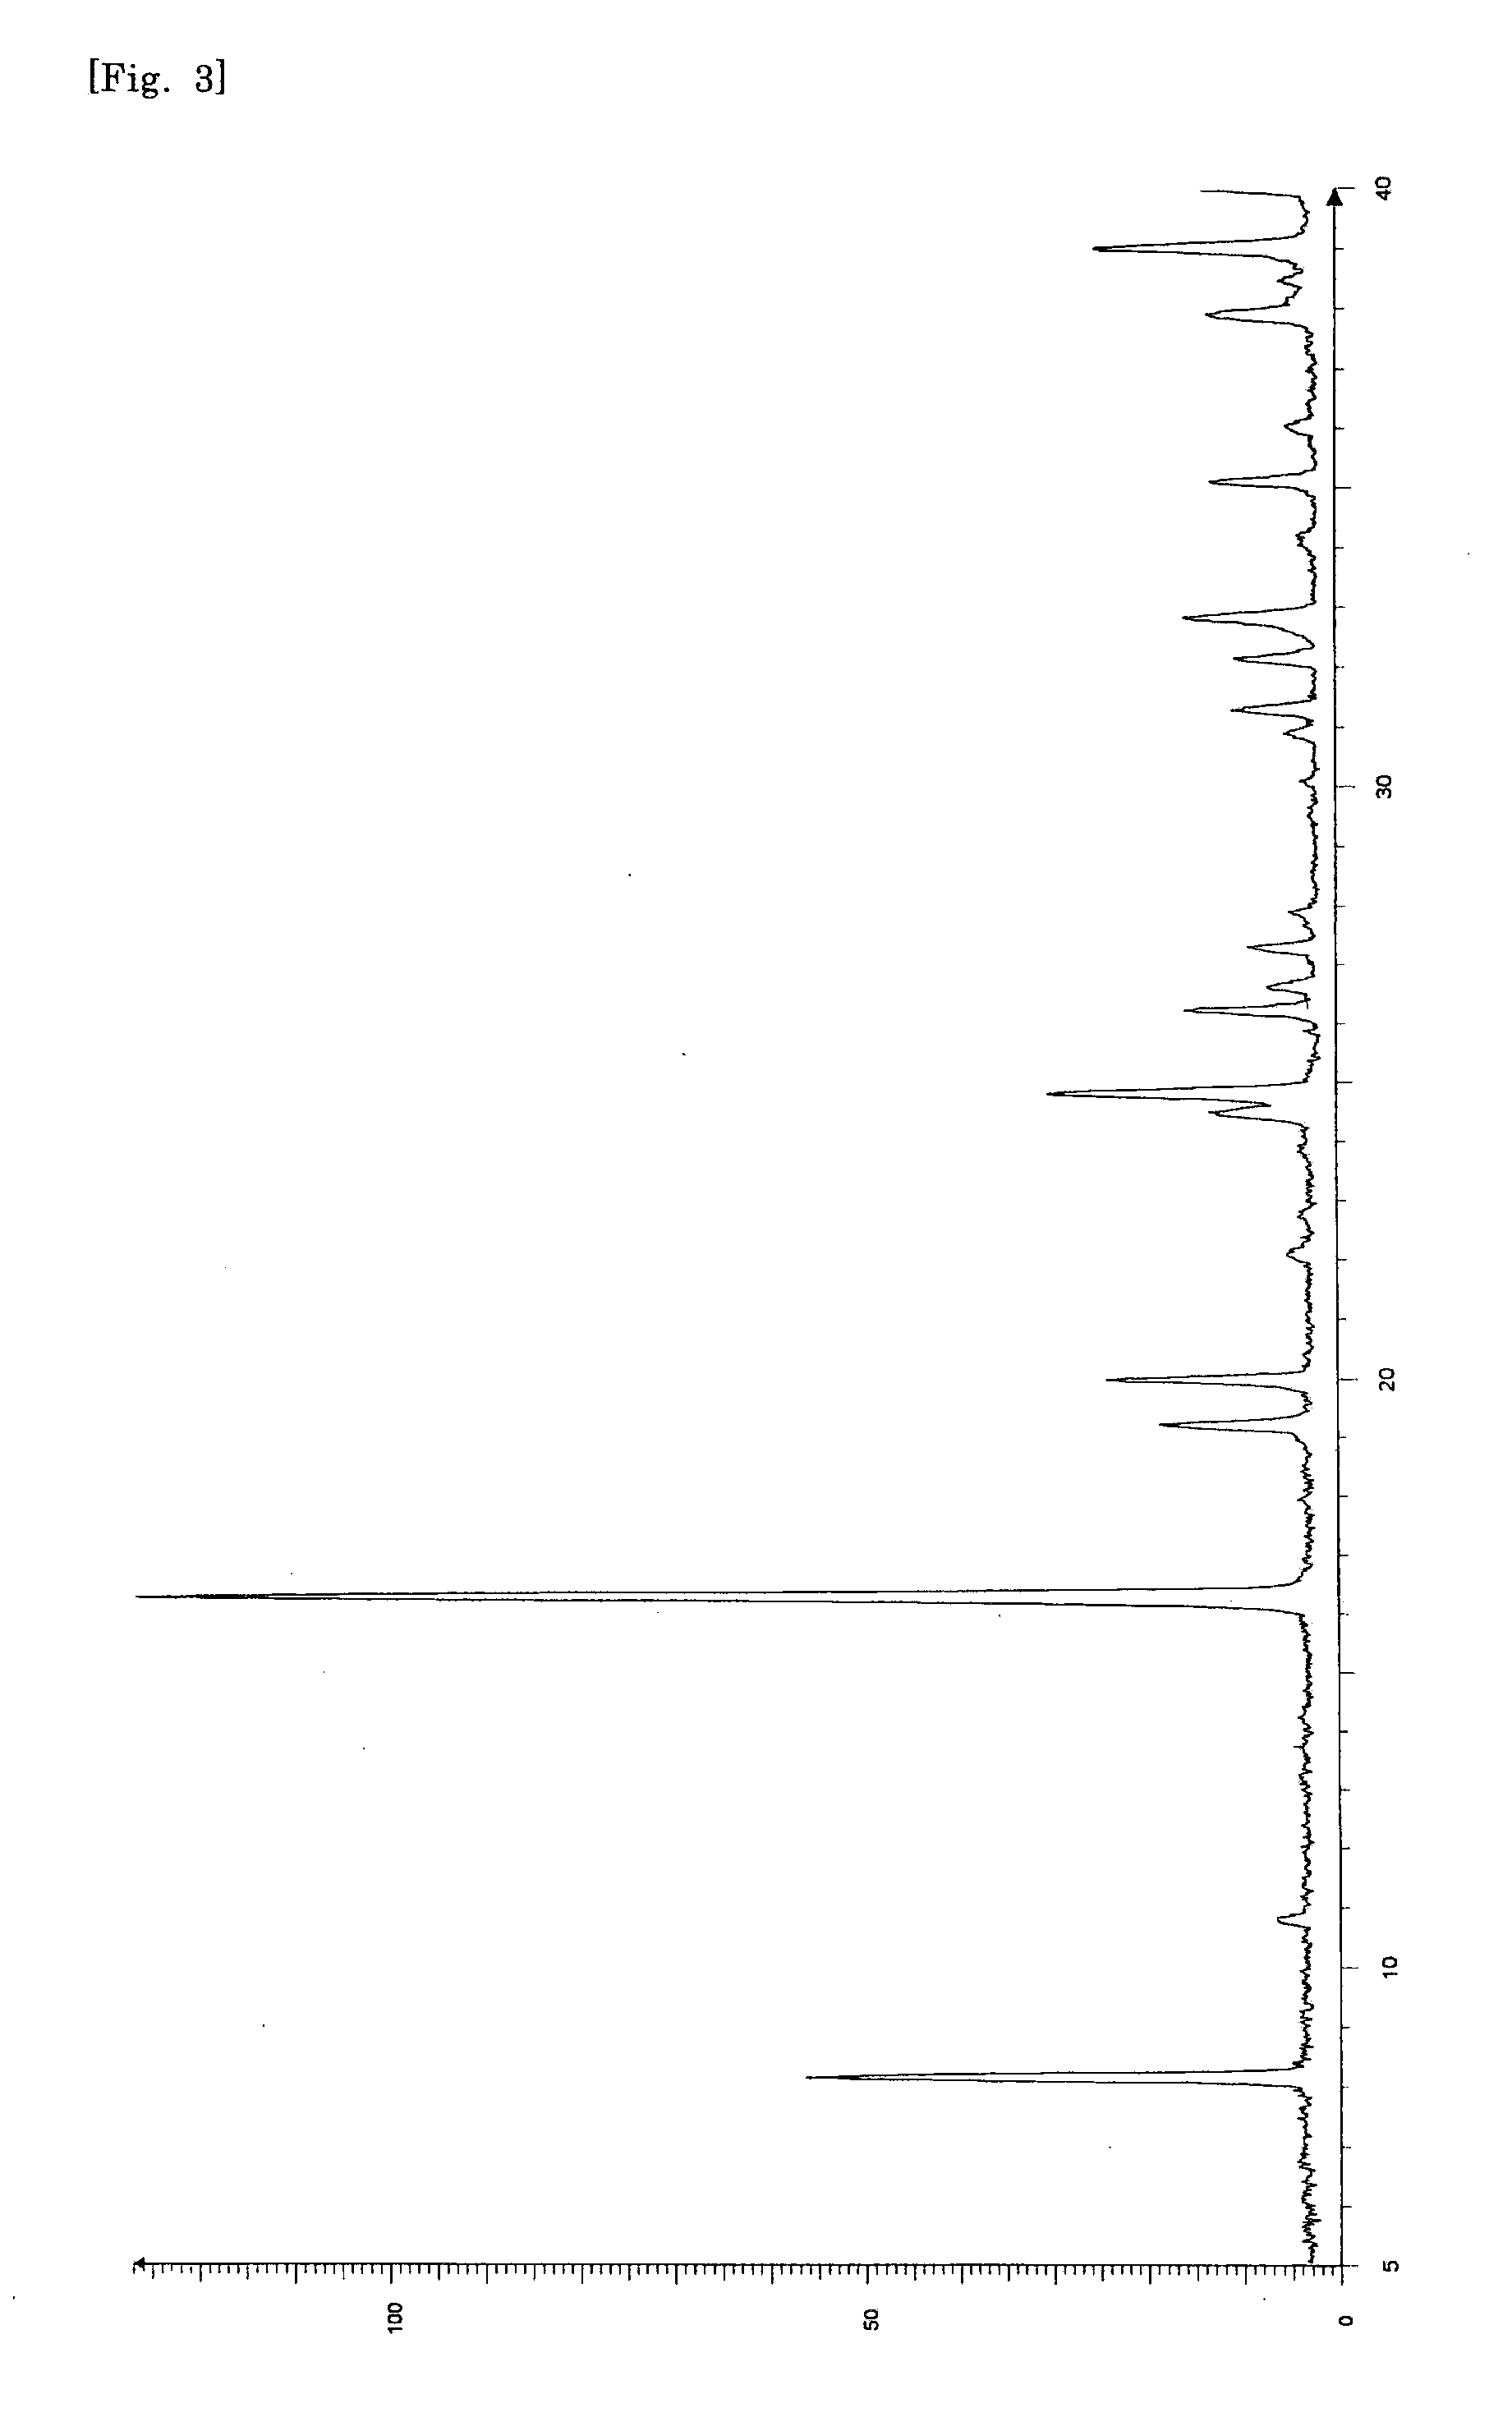 Pharmaceutical composition containing optically active compound having thrombopoietin receptor agonist activity, and intermediate therefor